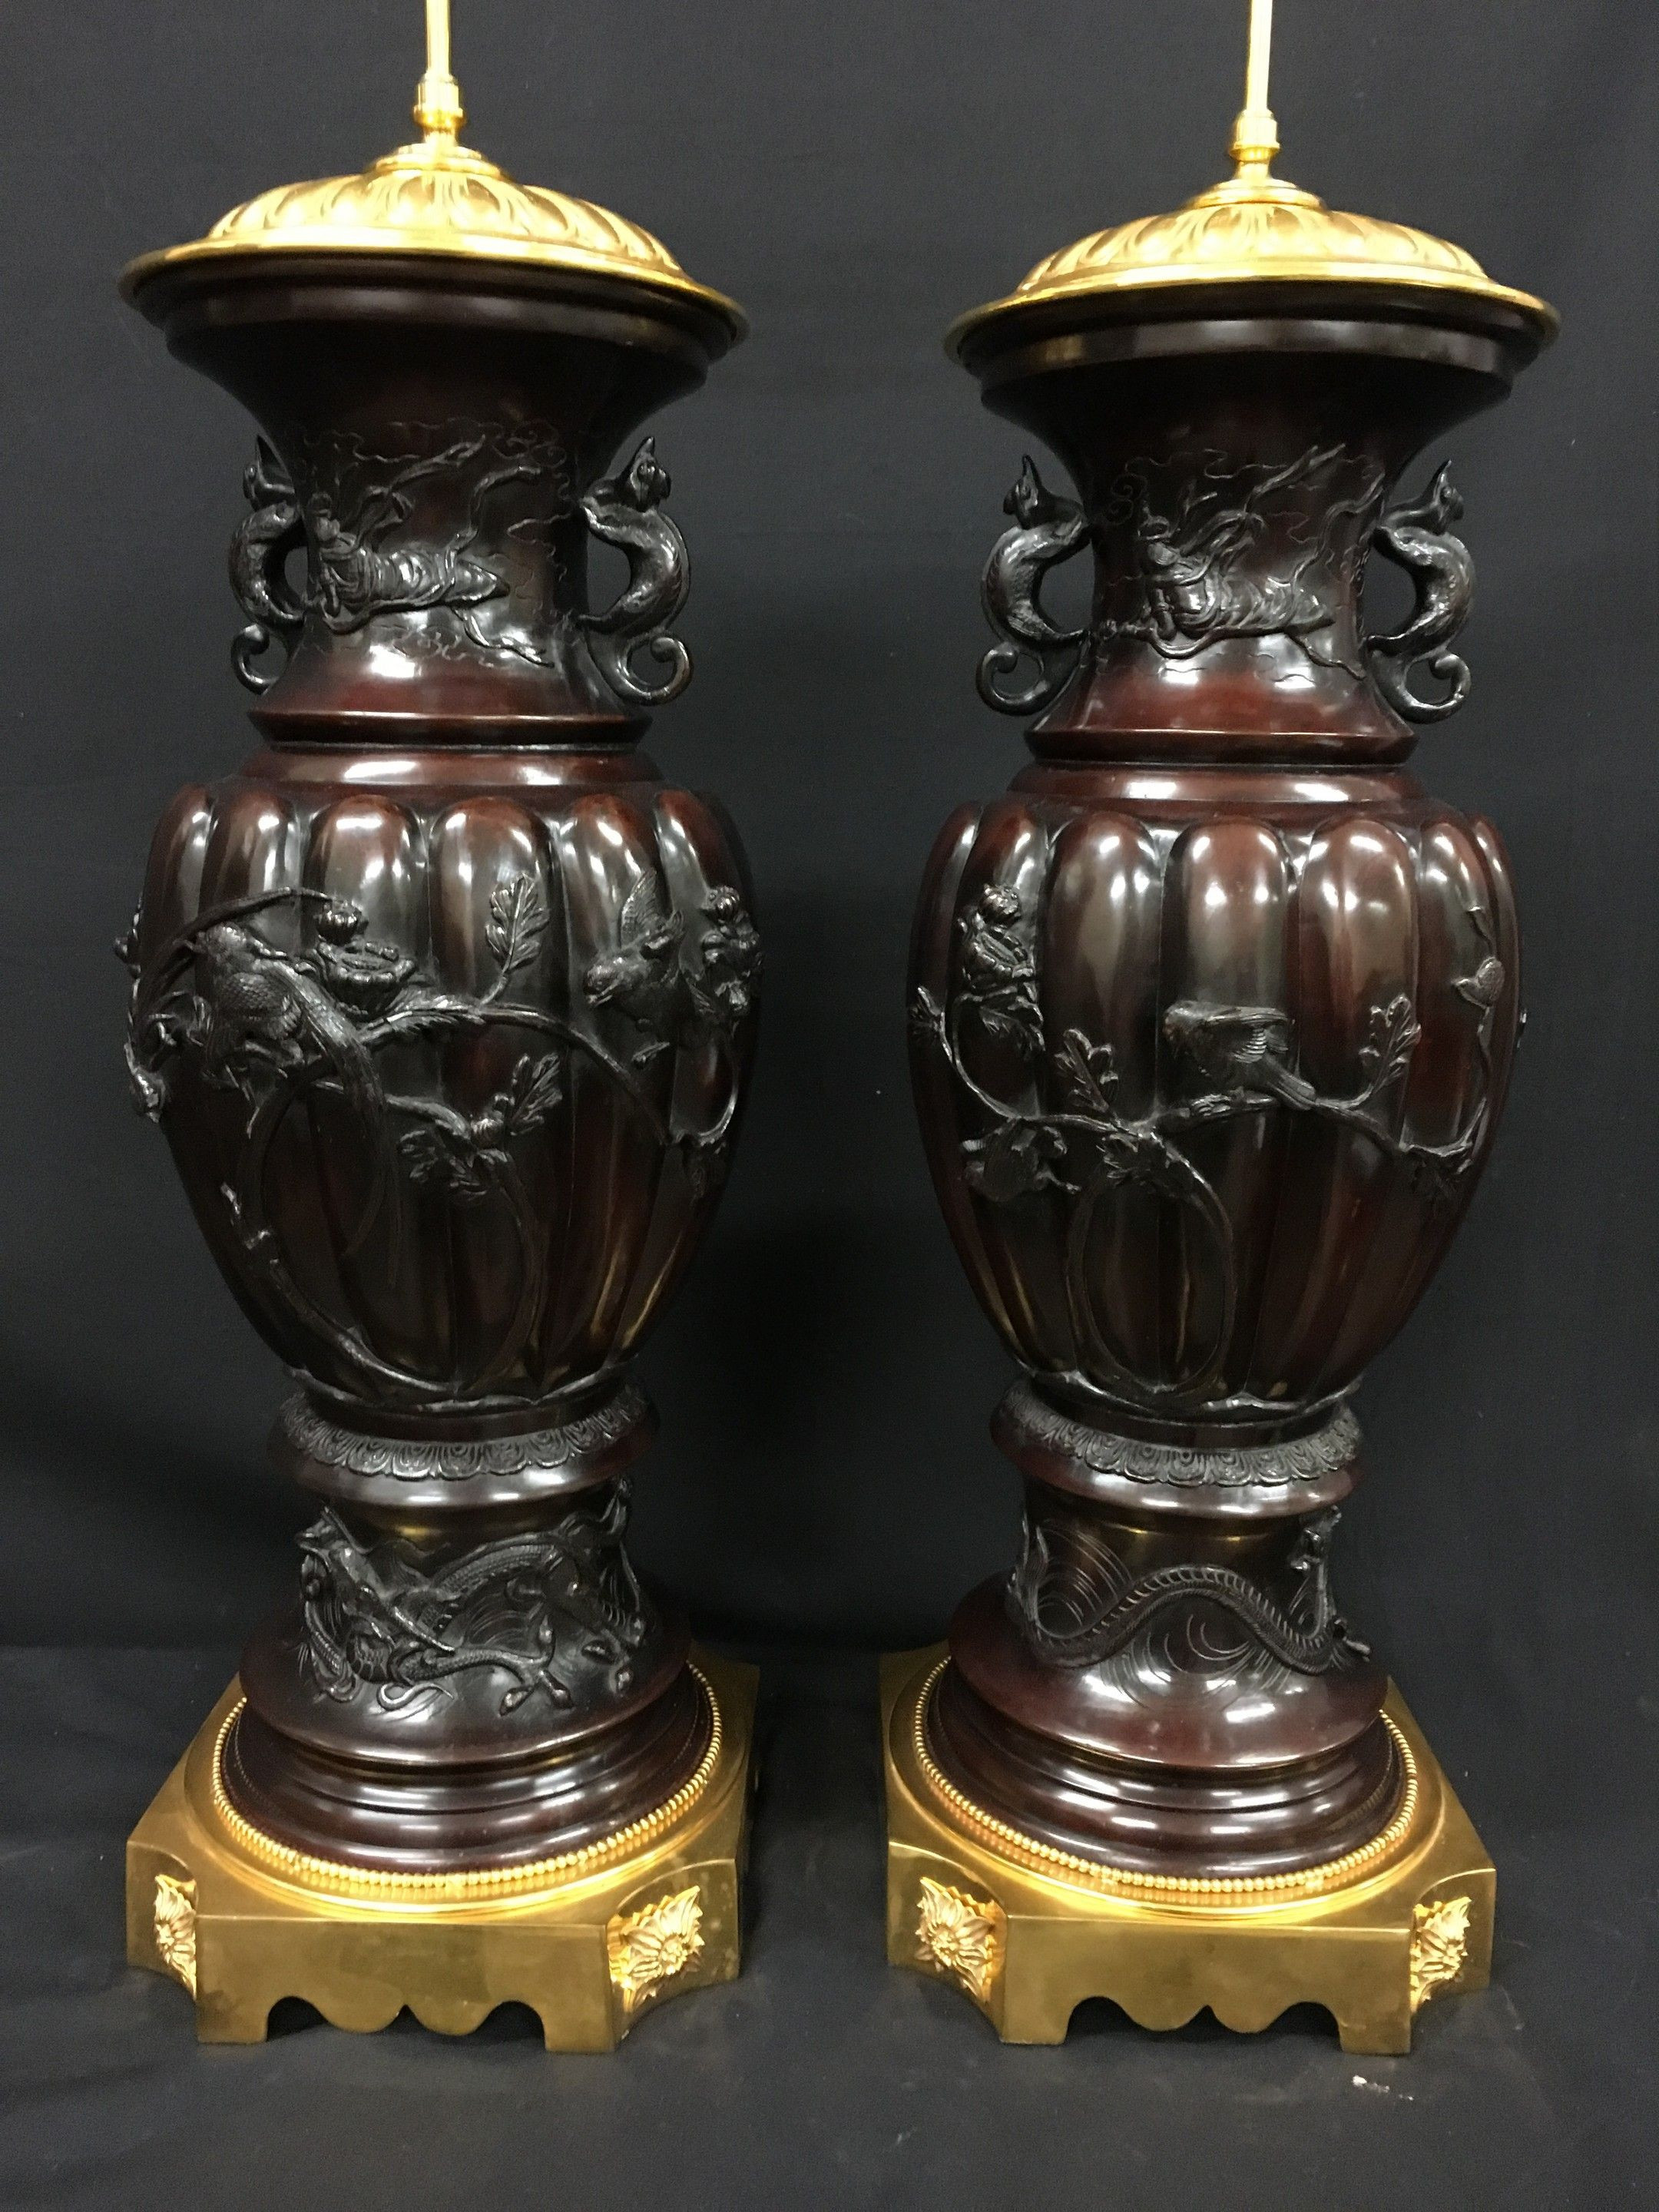 23 Fashionable Black and White Large Vase 2024 free download black and white large vase of antique japanese vases the uks premier antiques portal online with regard to pair large japanese bronze vases lamps